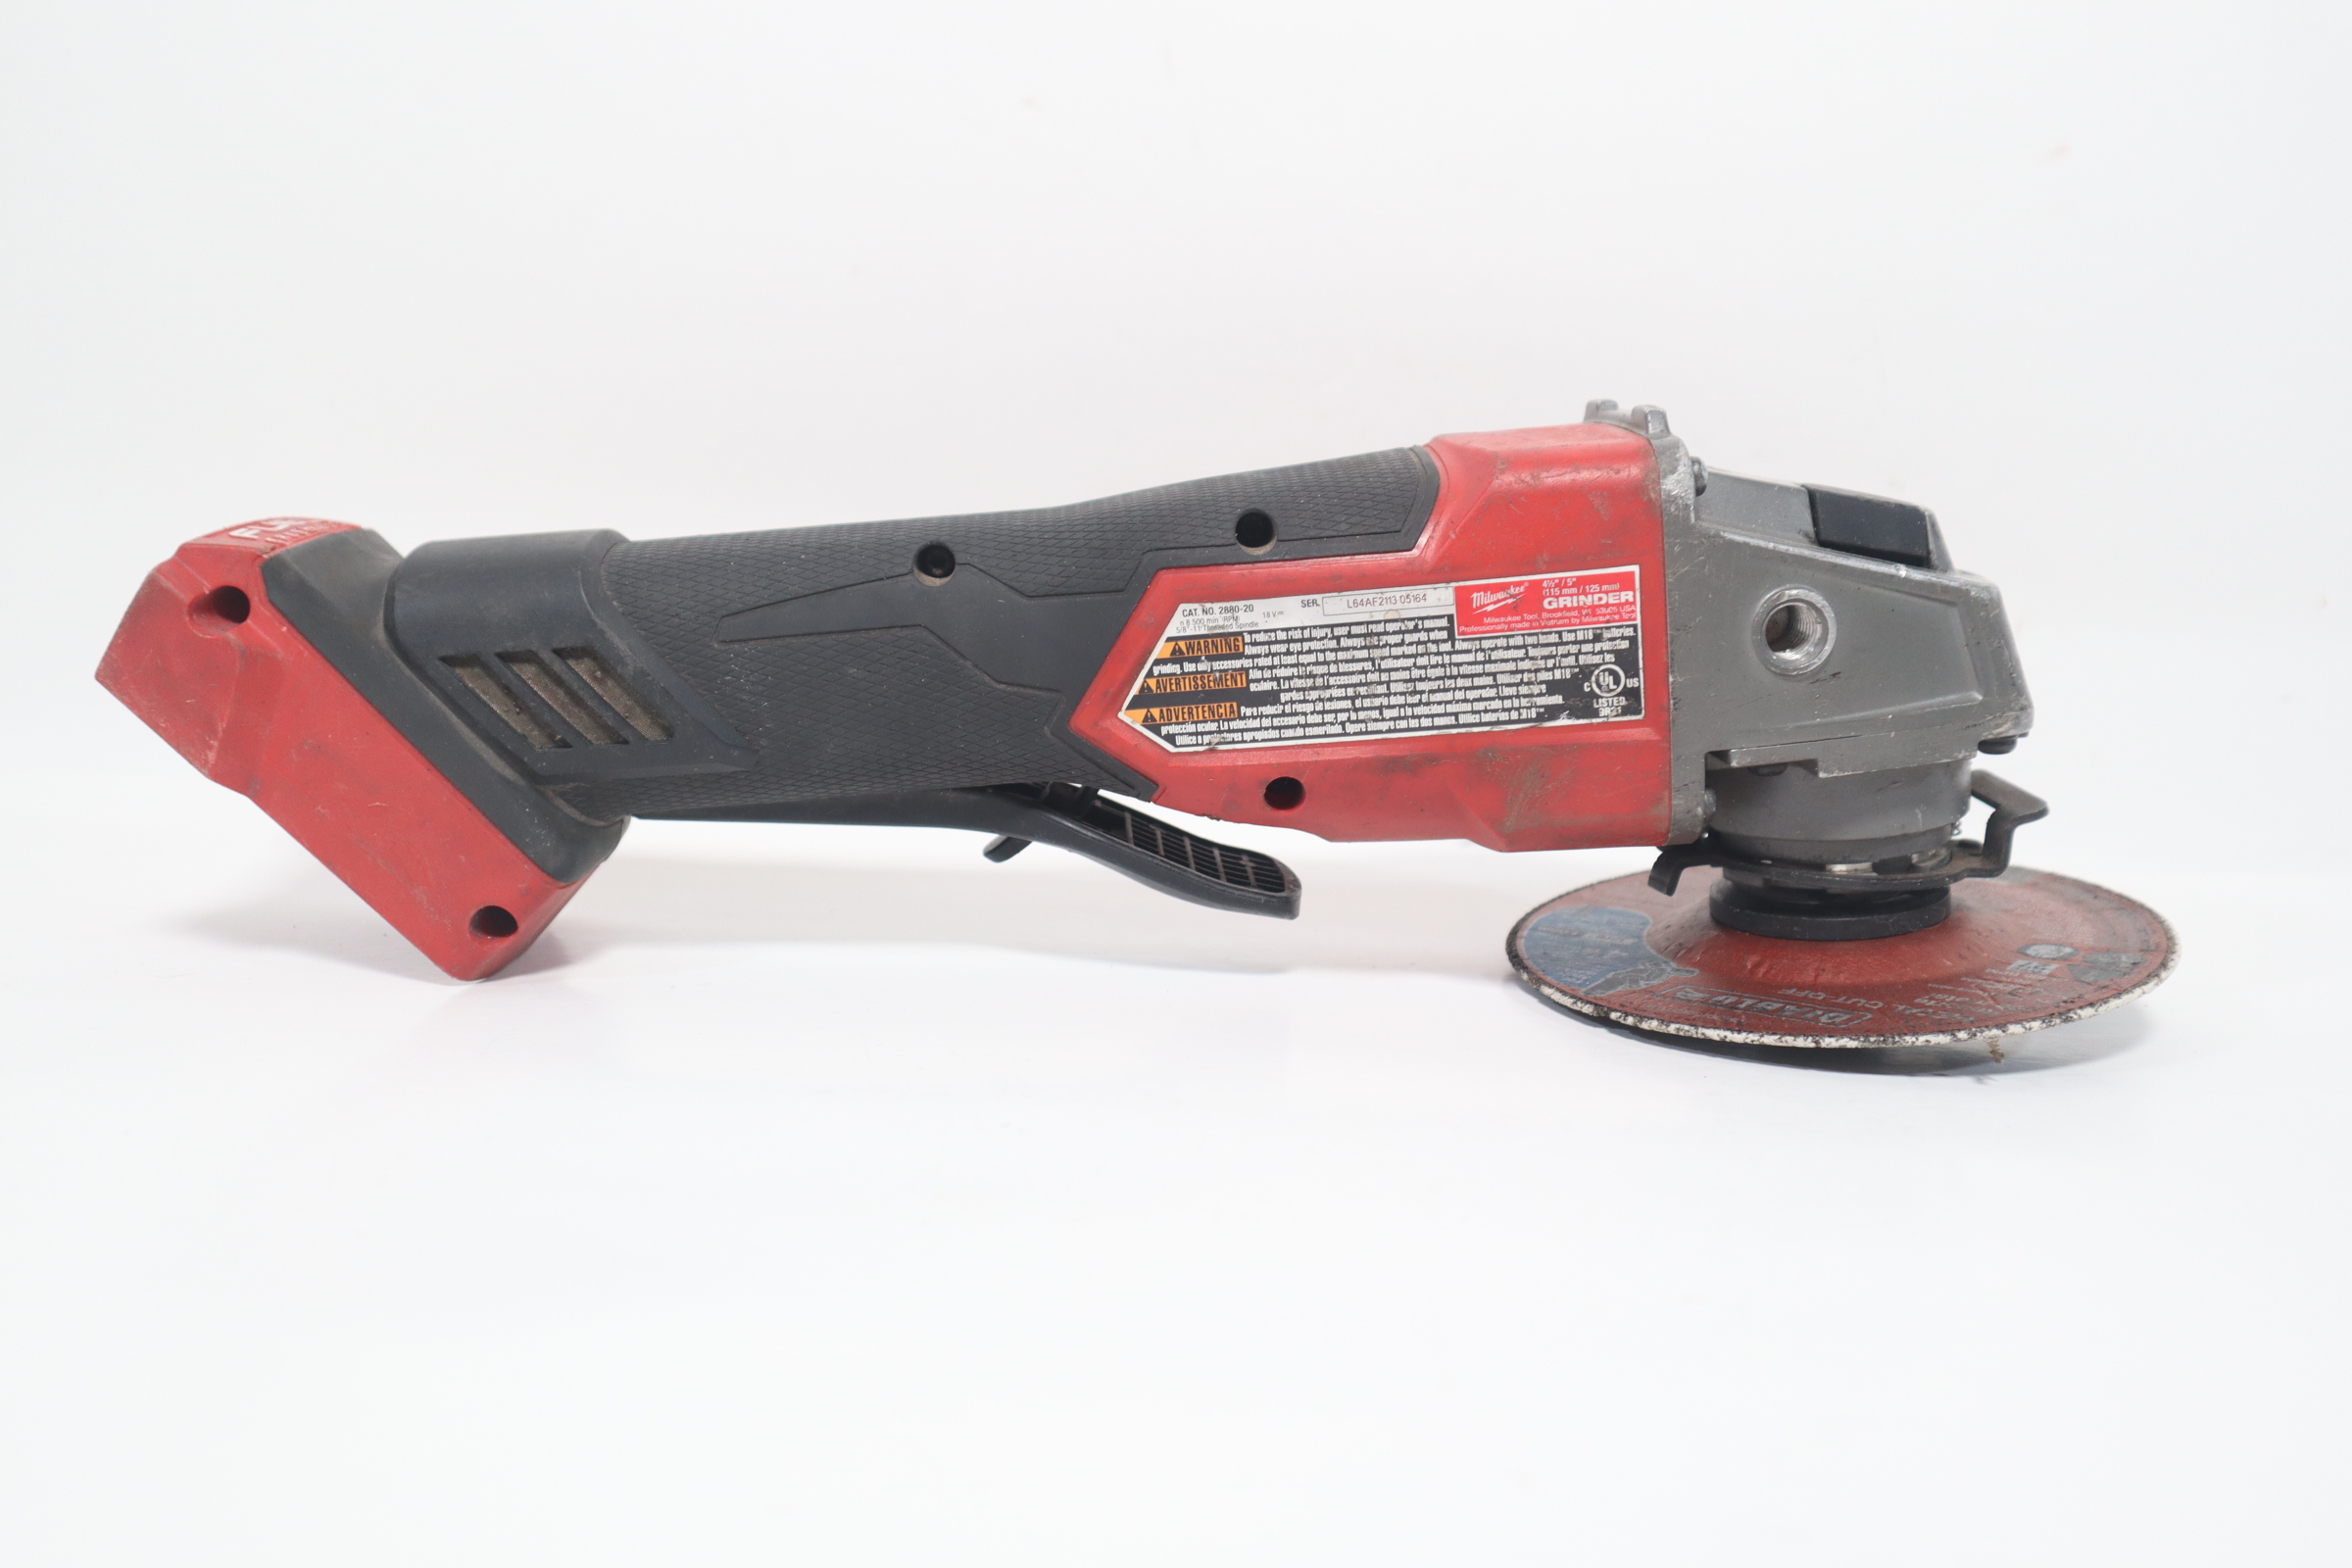 2880-20 M18 FUEL Brushless Lithium-Ion 4-1/2 in. / 5 in. Cordless Small  Angle Grinder with No-Lock Paddle Switch (Tool Only)